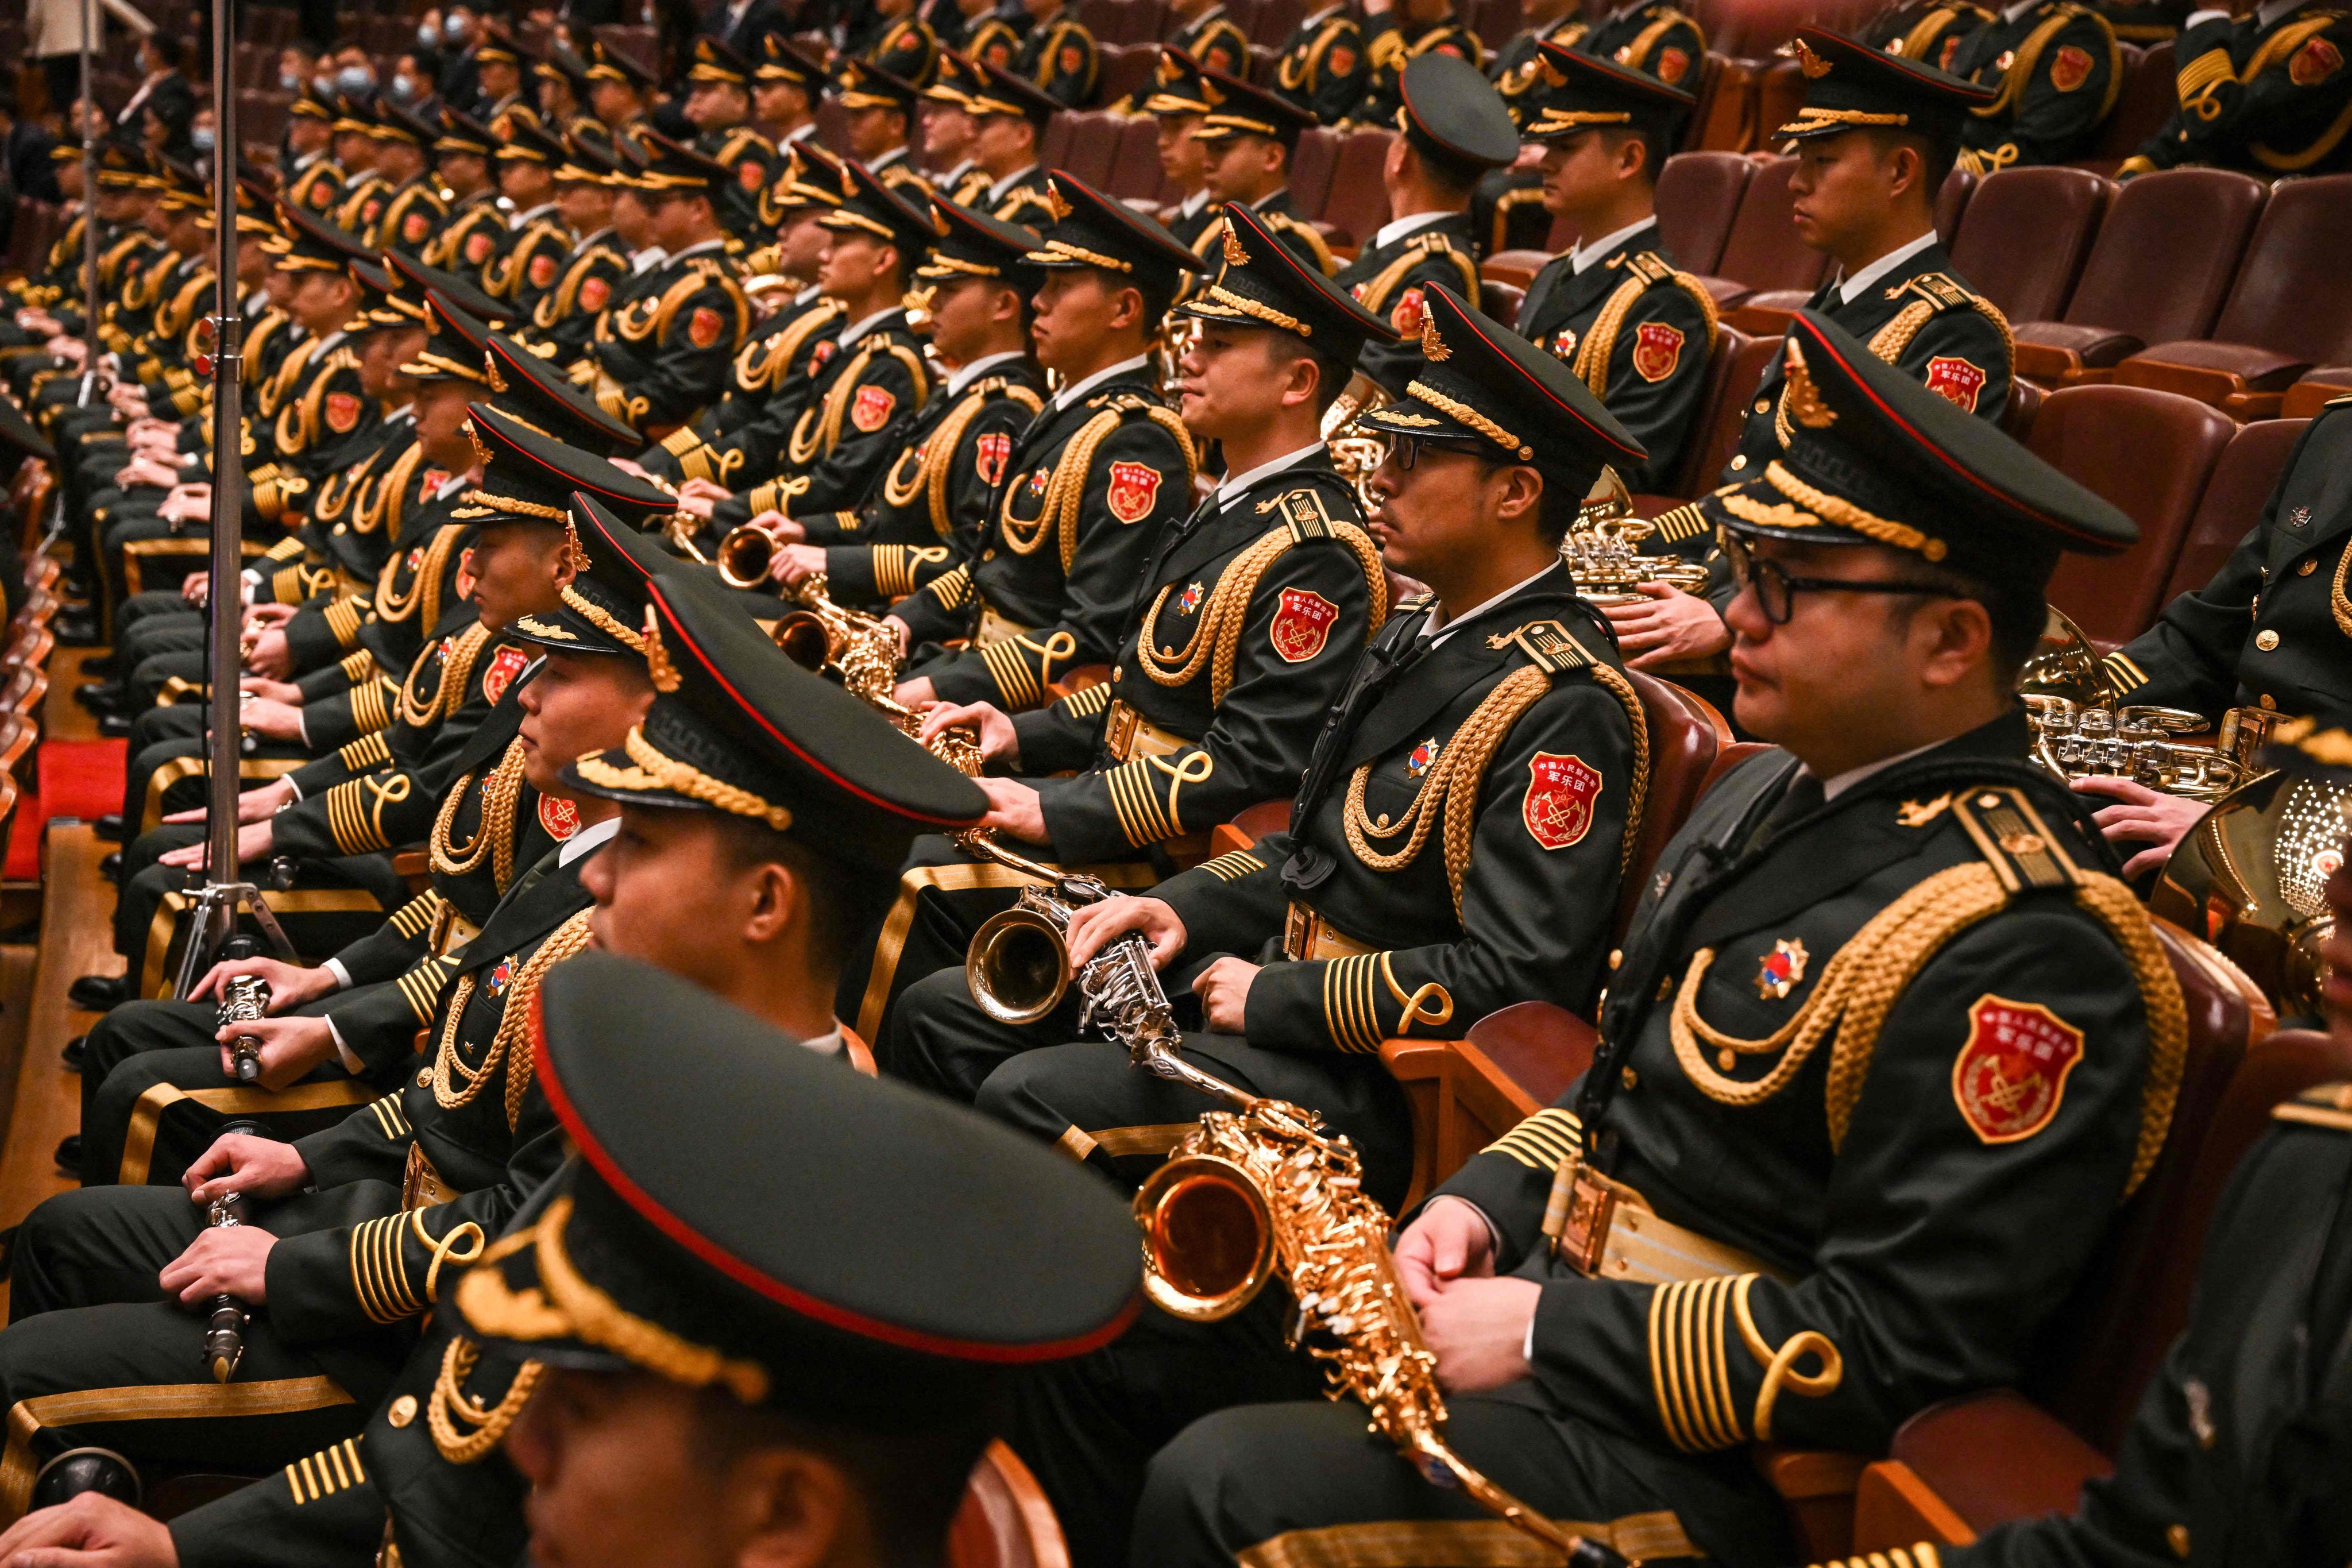 Members of the People’s Liberation Army band sit during the opening session of the Communist Party’s national congress at the Great Hall of the People in Beijing on October 16. Photo: AFP